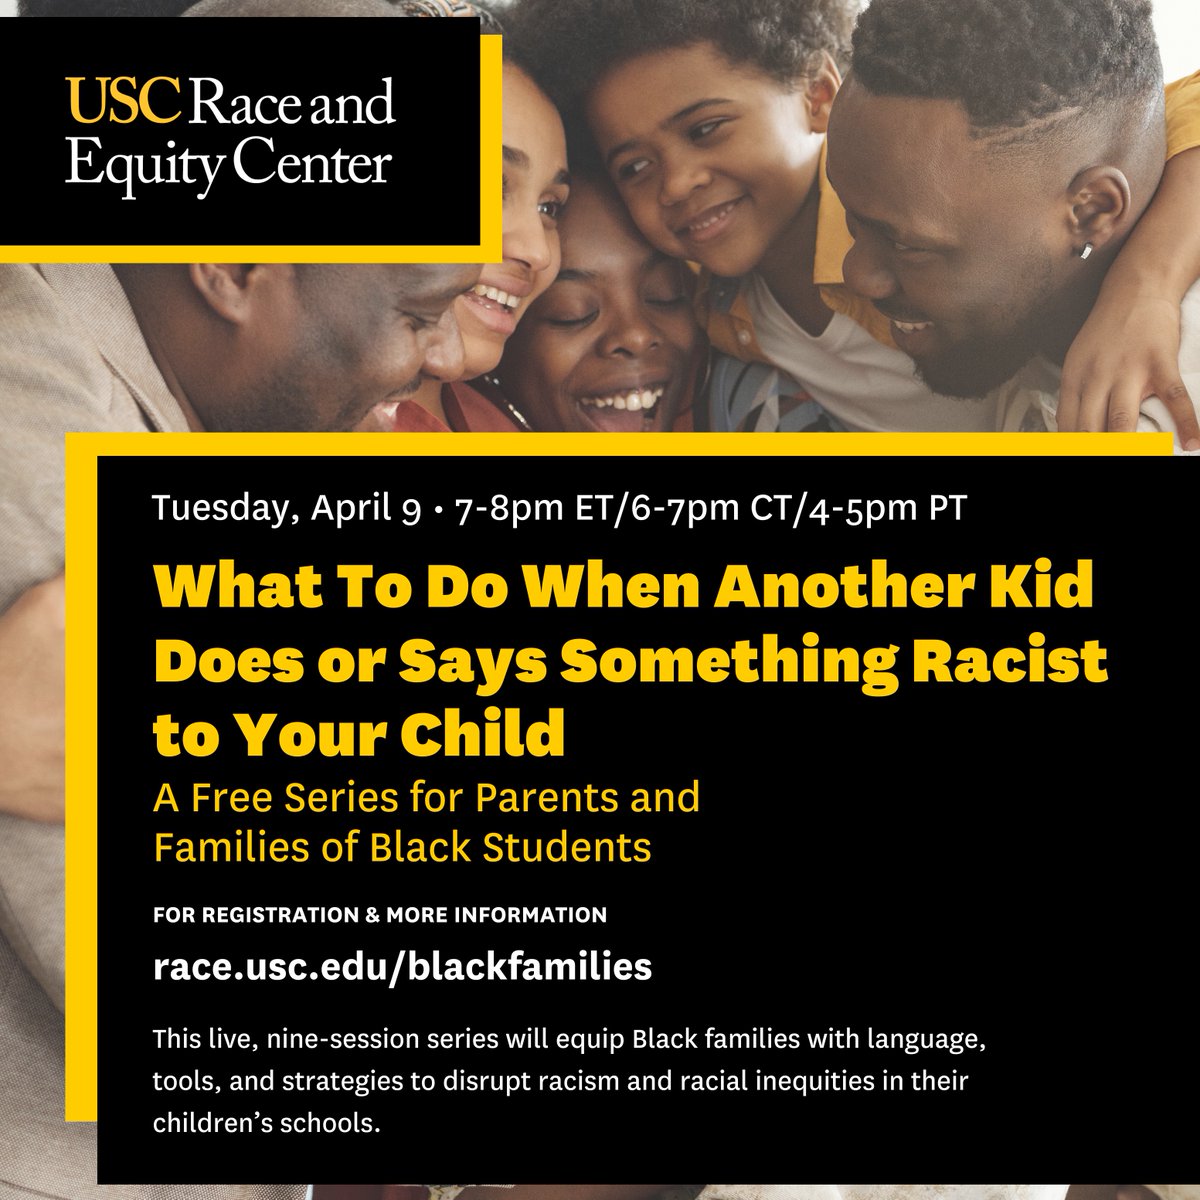 REMINDER: This is happening NOW! Join Dr. Jessica T. DeCuir-Gunby & Dr. Shaun Harper session on actions parents + families can take in response to racial problems in schools. It’s free. Register at no cost here: race.usc.edu/blackfamilies